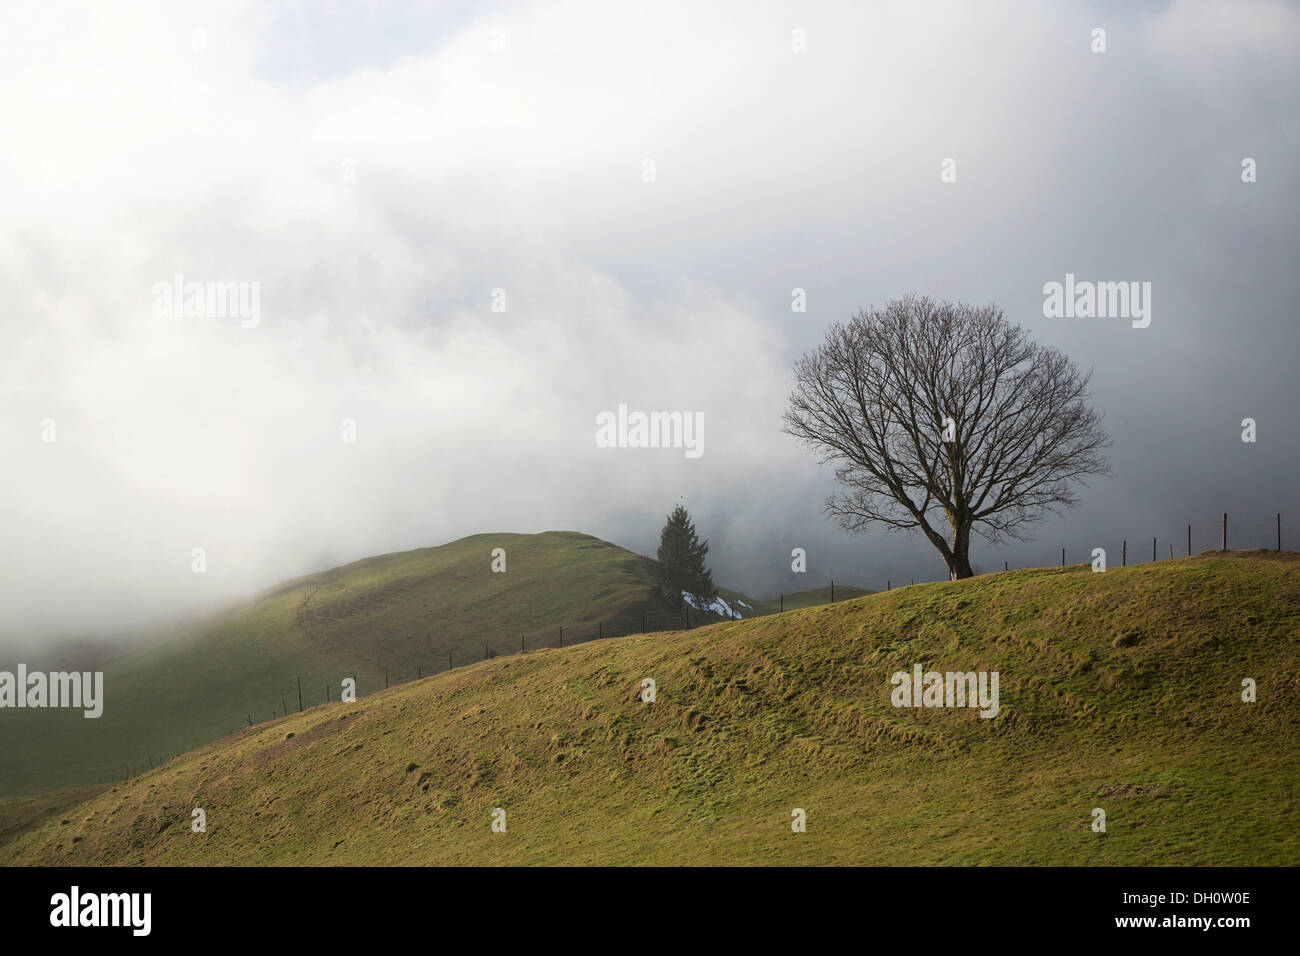 Misty atmosphere on a winter day, Appenzell, Appenzell, Canton of Appenzell Innerrhoden, Switzerland Stock Photo